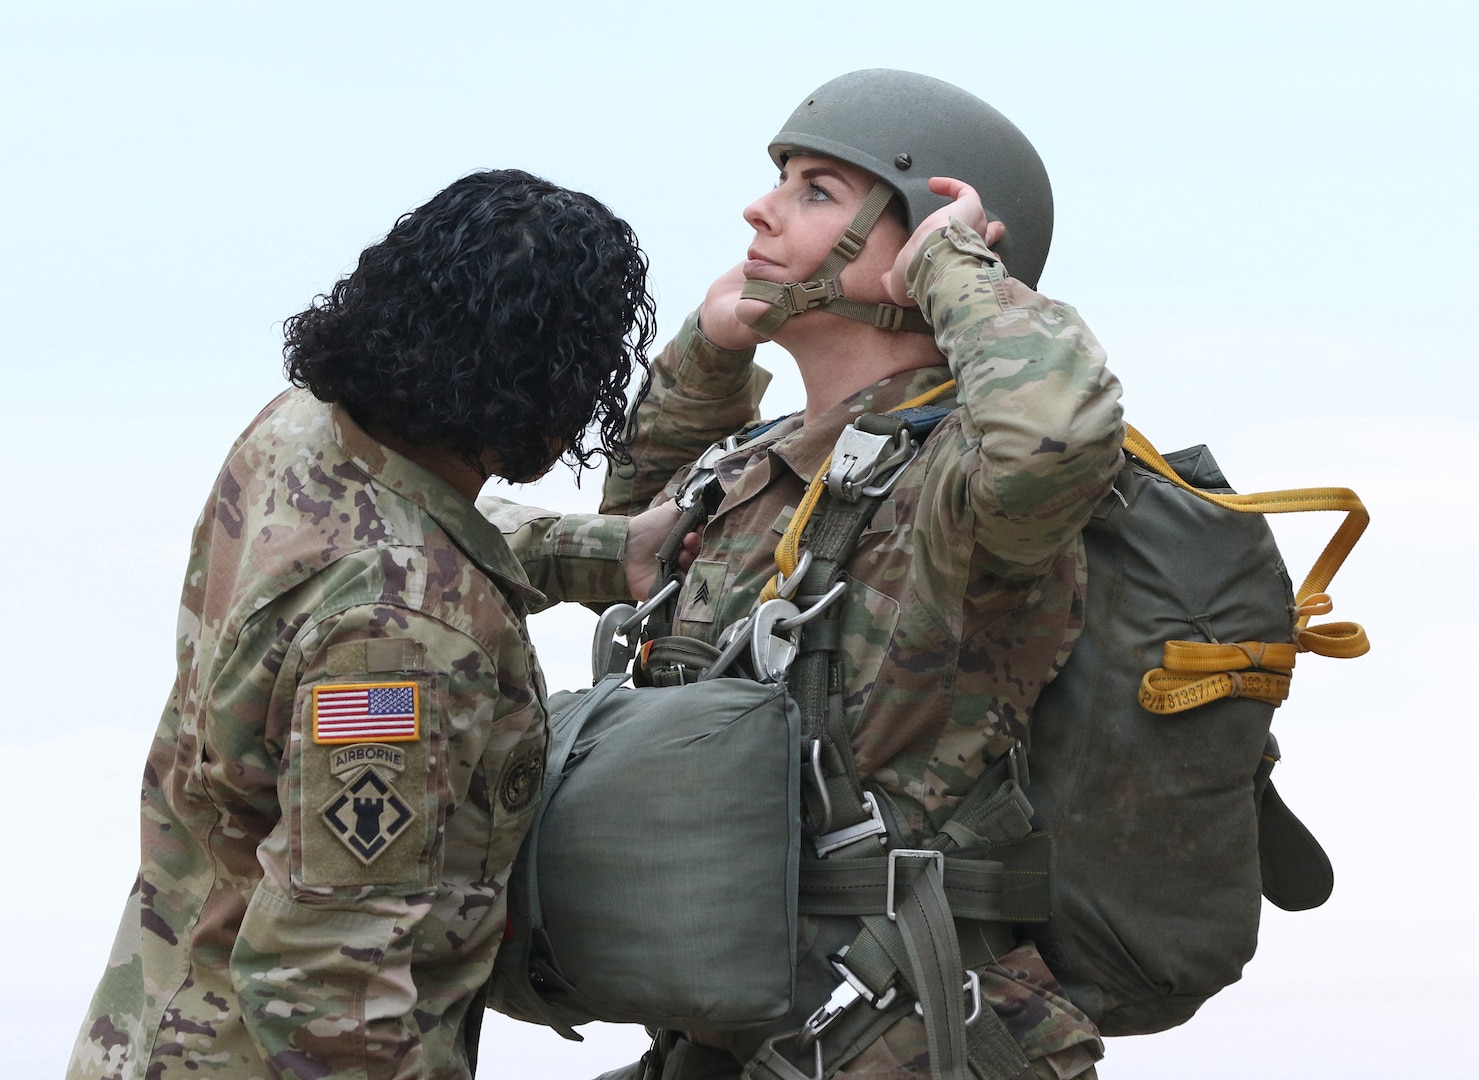 Master Sgt. Jessica Alicea-Cavezza (right), Sexual Harassment Assault Response Prevention Program Manager conducts a jumpmaster pre-inspection with Sgt. Allyson Westfall, parachute rigger, both from the U.S. Army John F. Kennedy Special Warfare Center and School, prior to an airborne operation over Luzon Drop Zone at Camp Mackall, North Carolina, March 25, 2019. The Soldiers completed an all-women’s pass and performed the jump in celebration of Women’s History Month, which has been celebrated in the United States since 1987, and highlighted contributions of women to U.S. Army history and society.